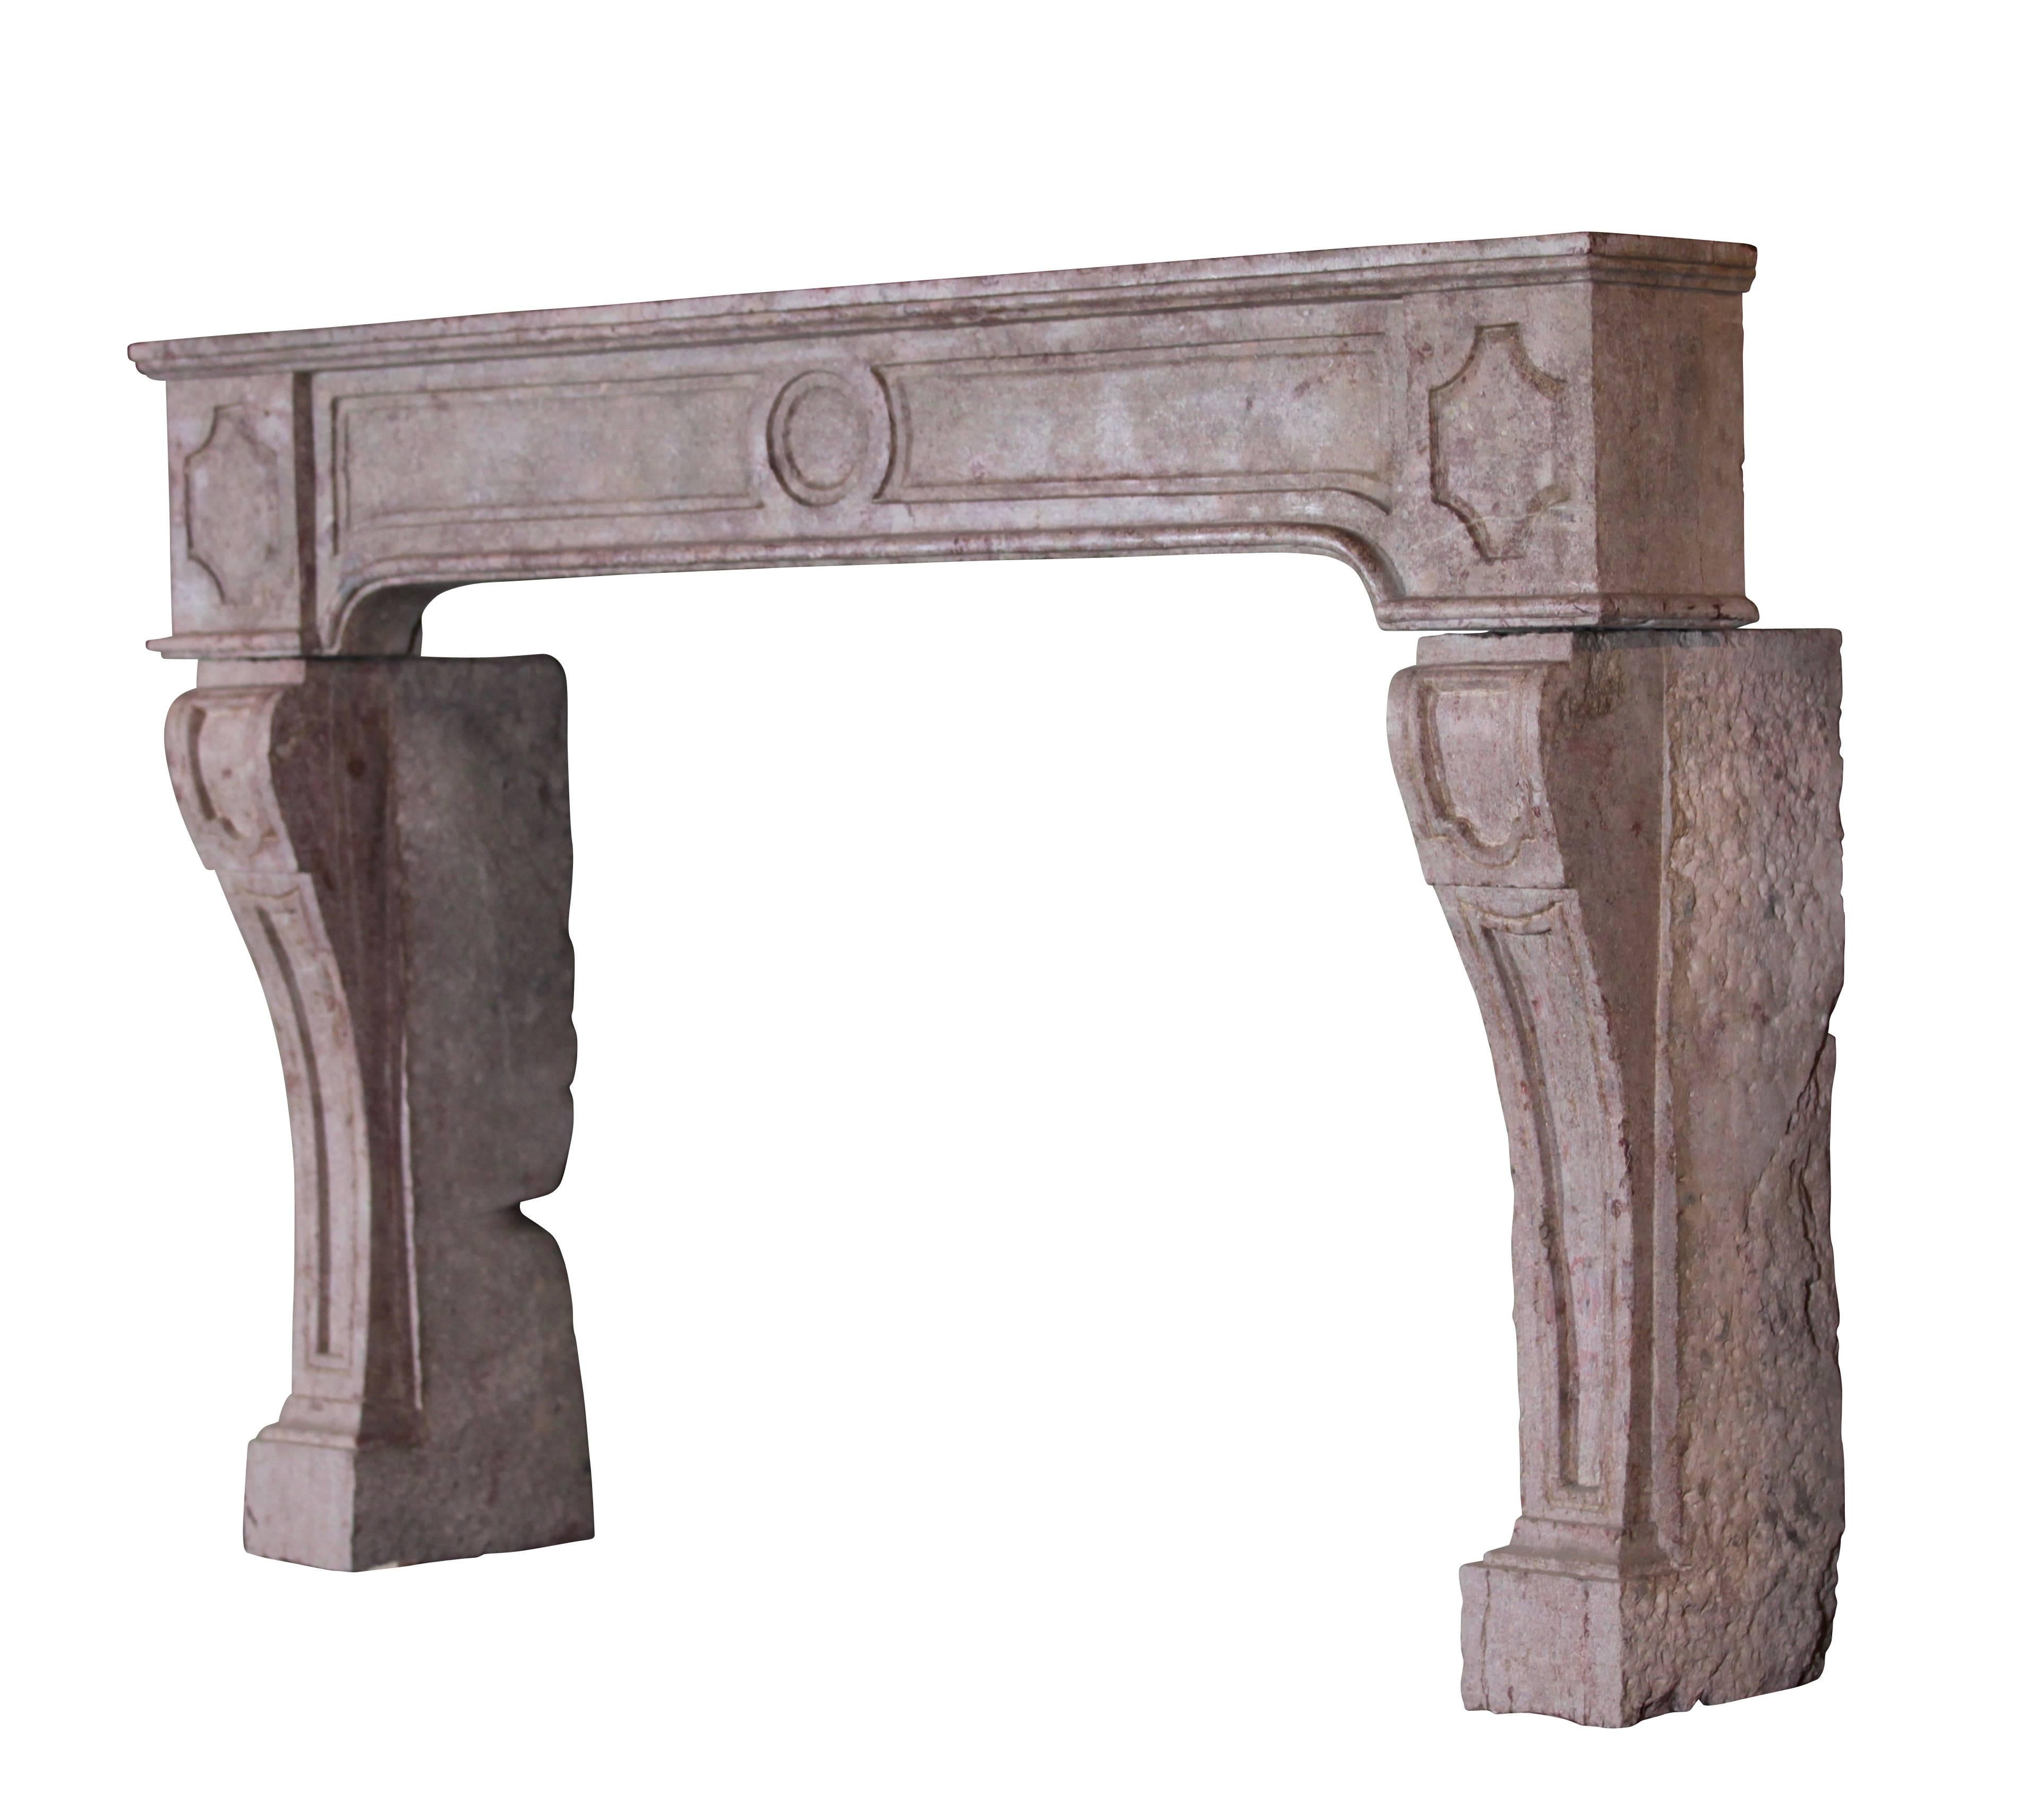 This antique fireplace surround in Burgundy reddish marble stone has a naive rustic touch. Waxing can make this piece having a richer look, more to porfire. The legs are very elegant.

Measures:
174 cm EW 68,50",
118 cm EH 46,45",
133